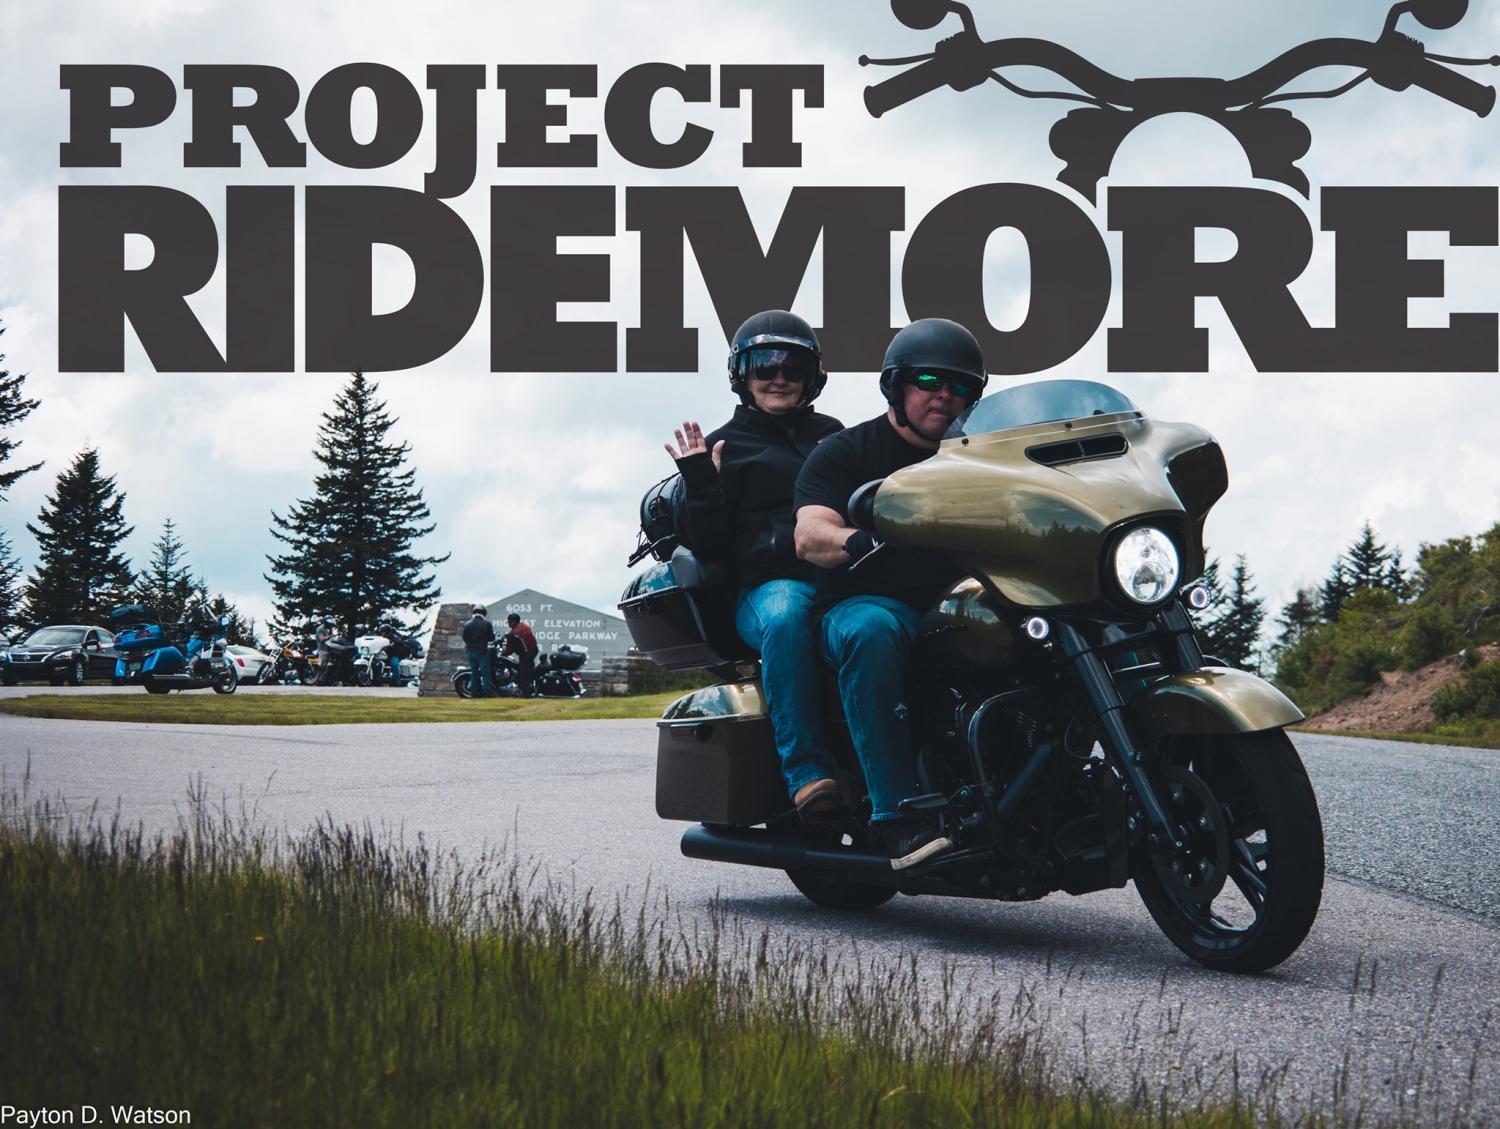 Project Ridemore: Road To Nowhere